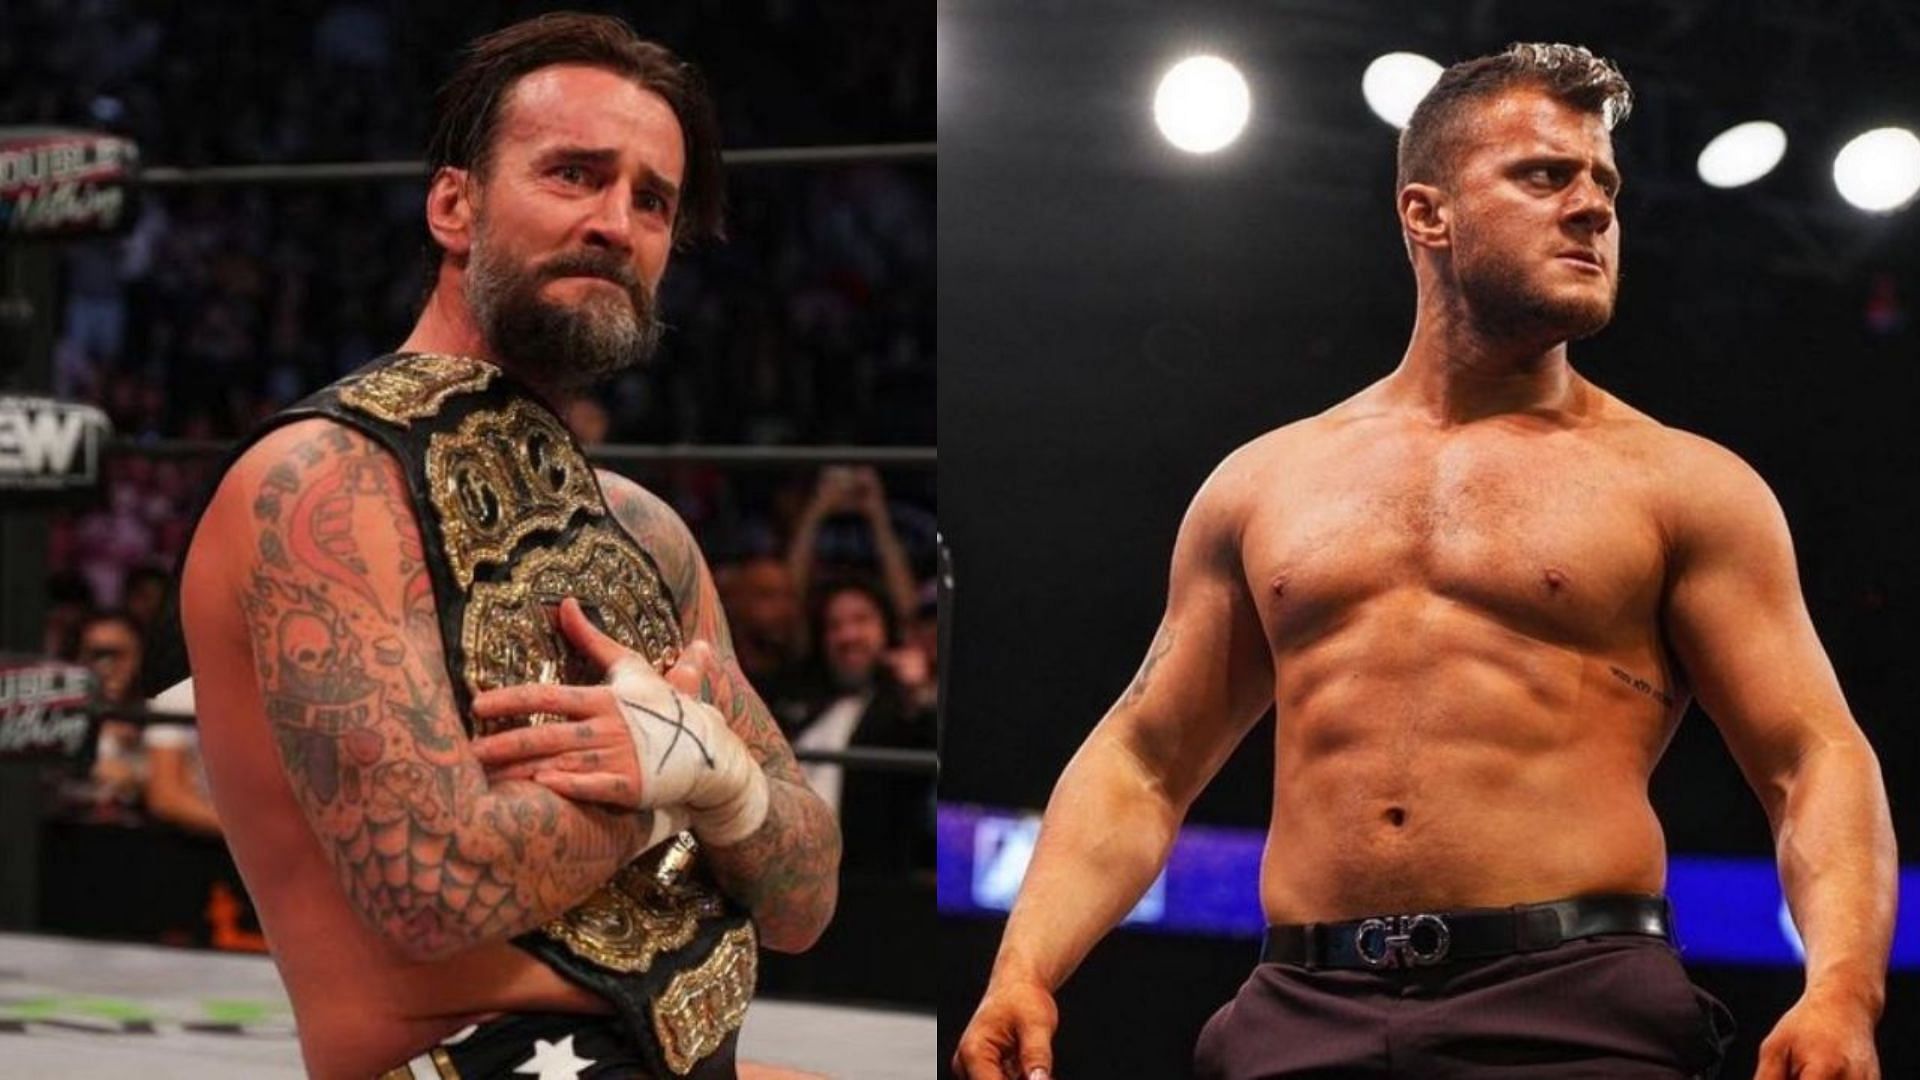 Will CM Punk and MJF meet in the ring once again?